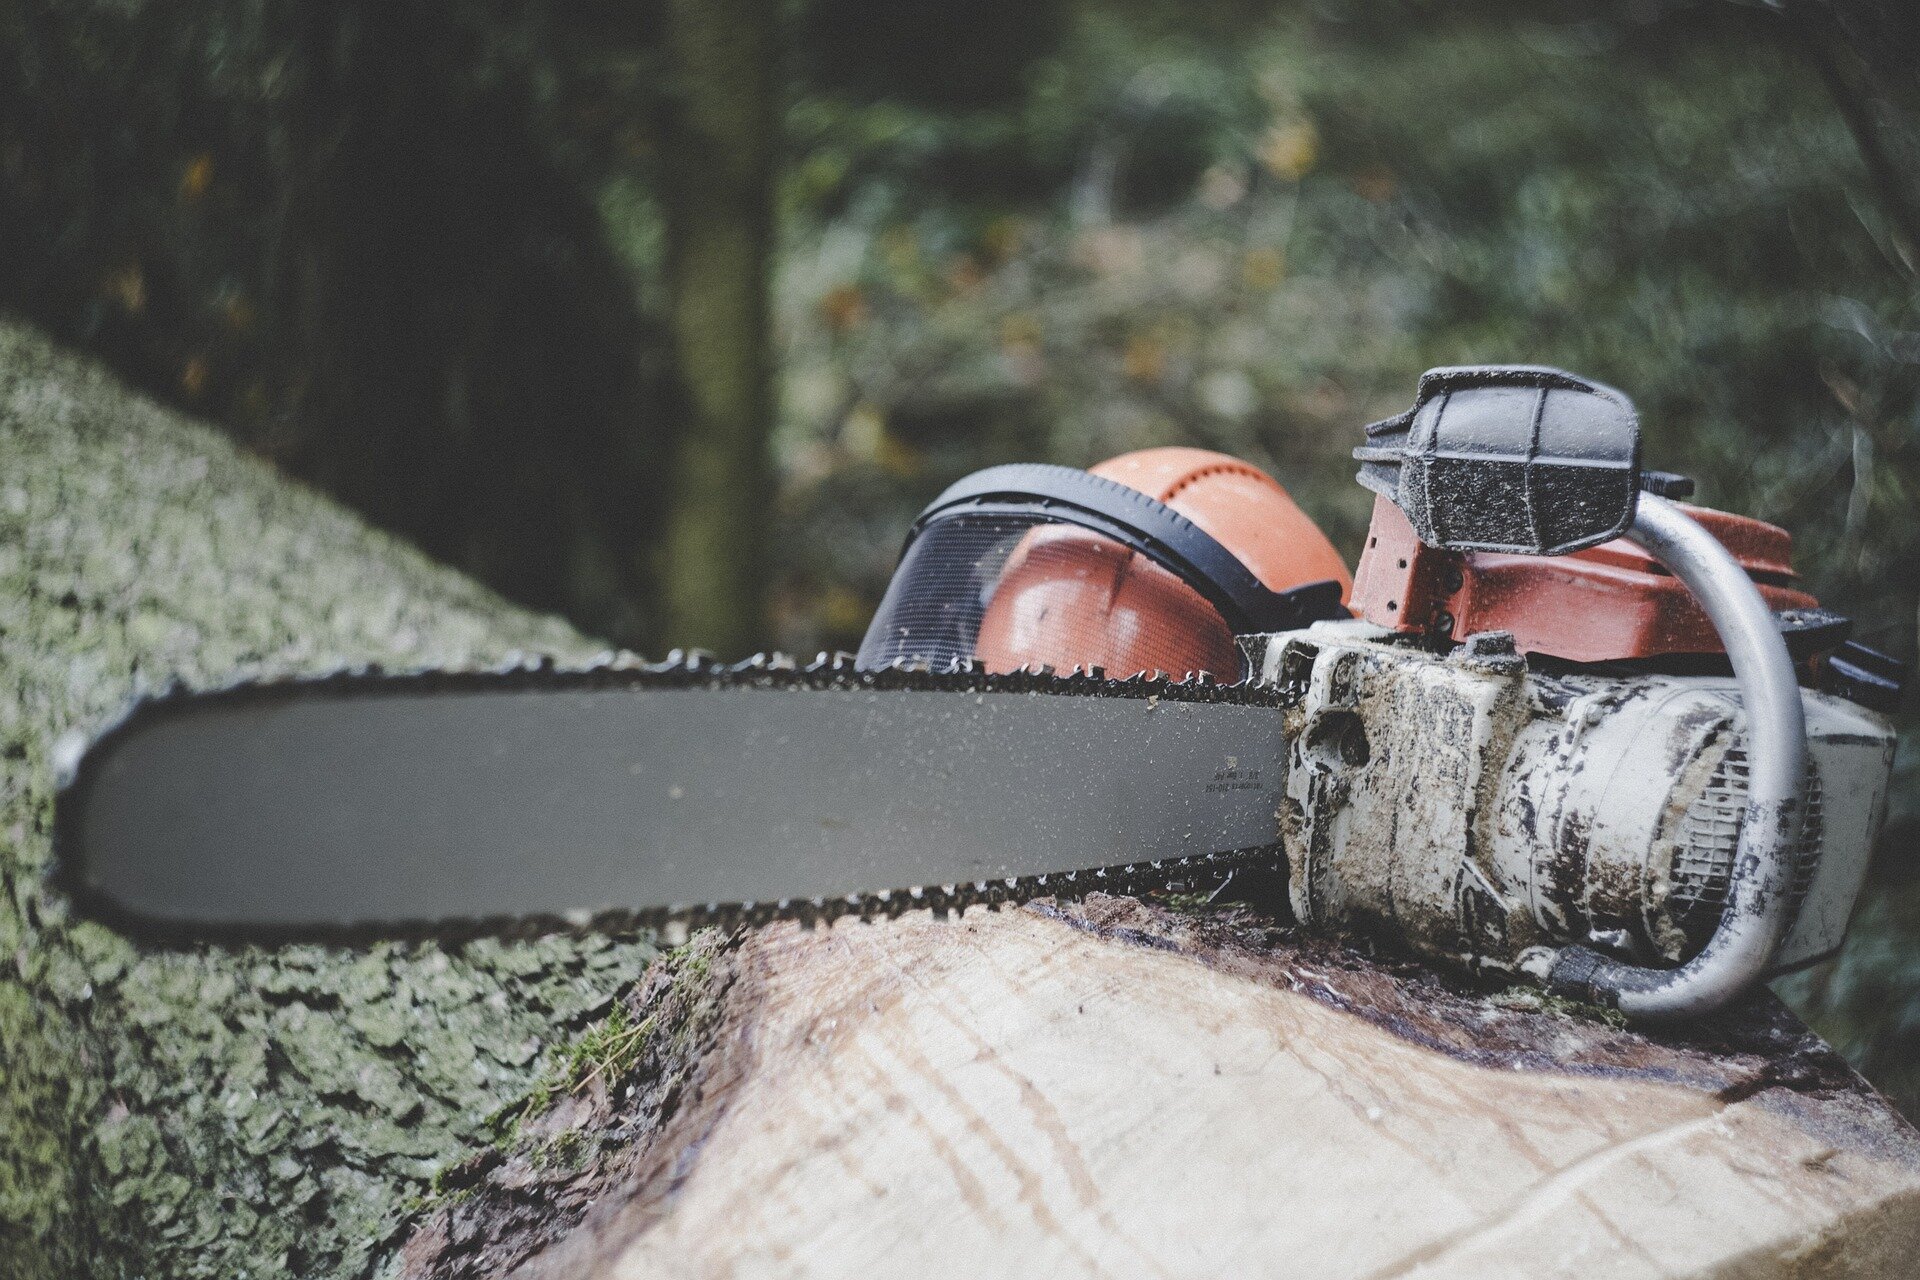 Sugarloaf is hosting a course to learn how to use and maintain a chainsaw. Level 1 course takes place on June 15 and level 2 course takes place on June 16. Each class runs from 9 am to 5 pm.

Learn more and register at https://sugarloafnorthshore.org